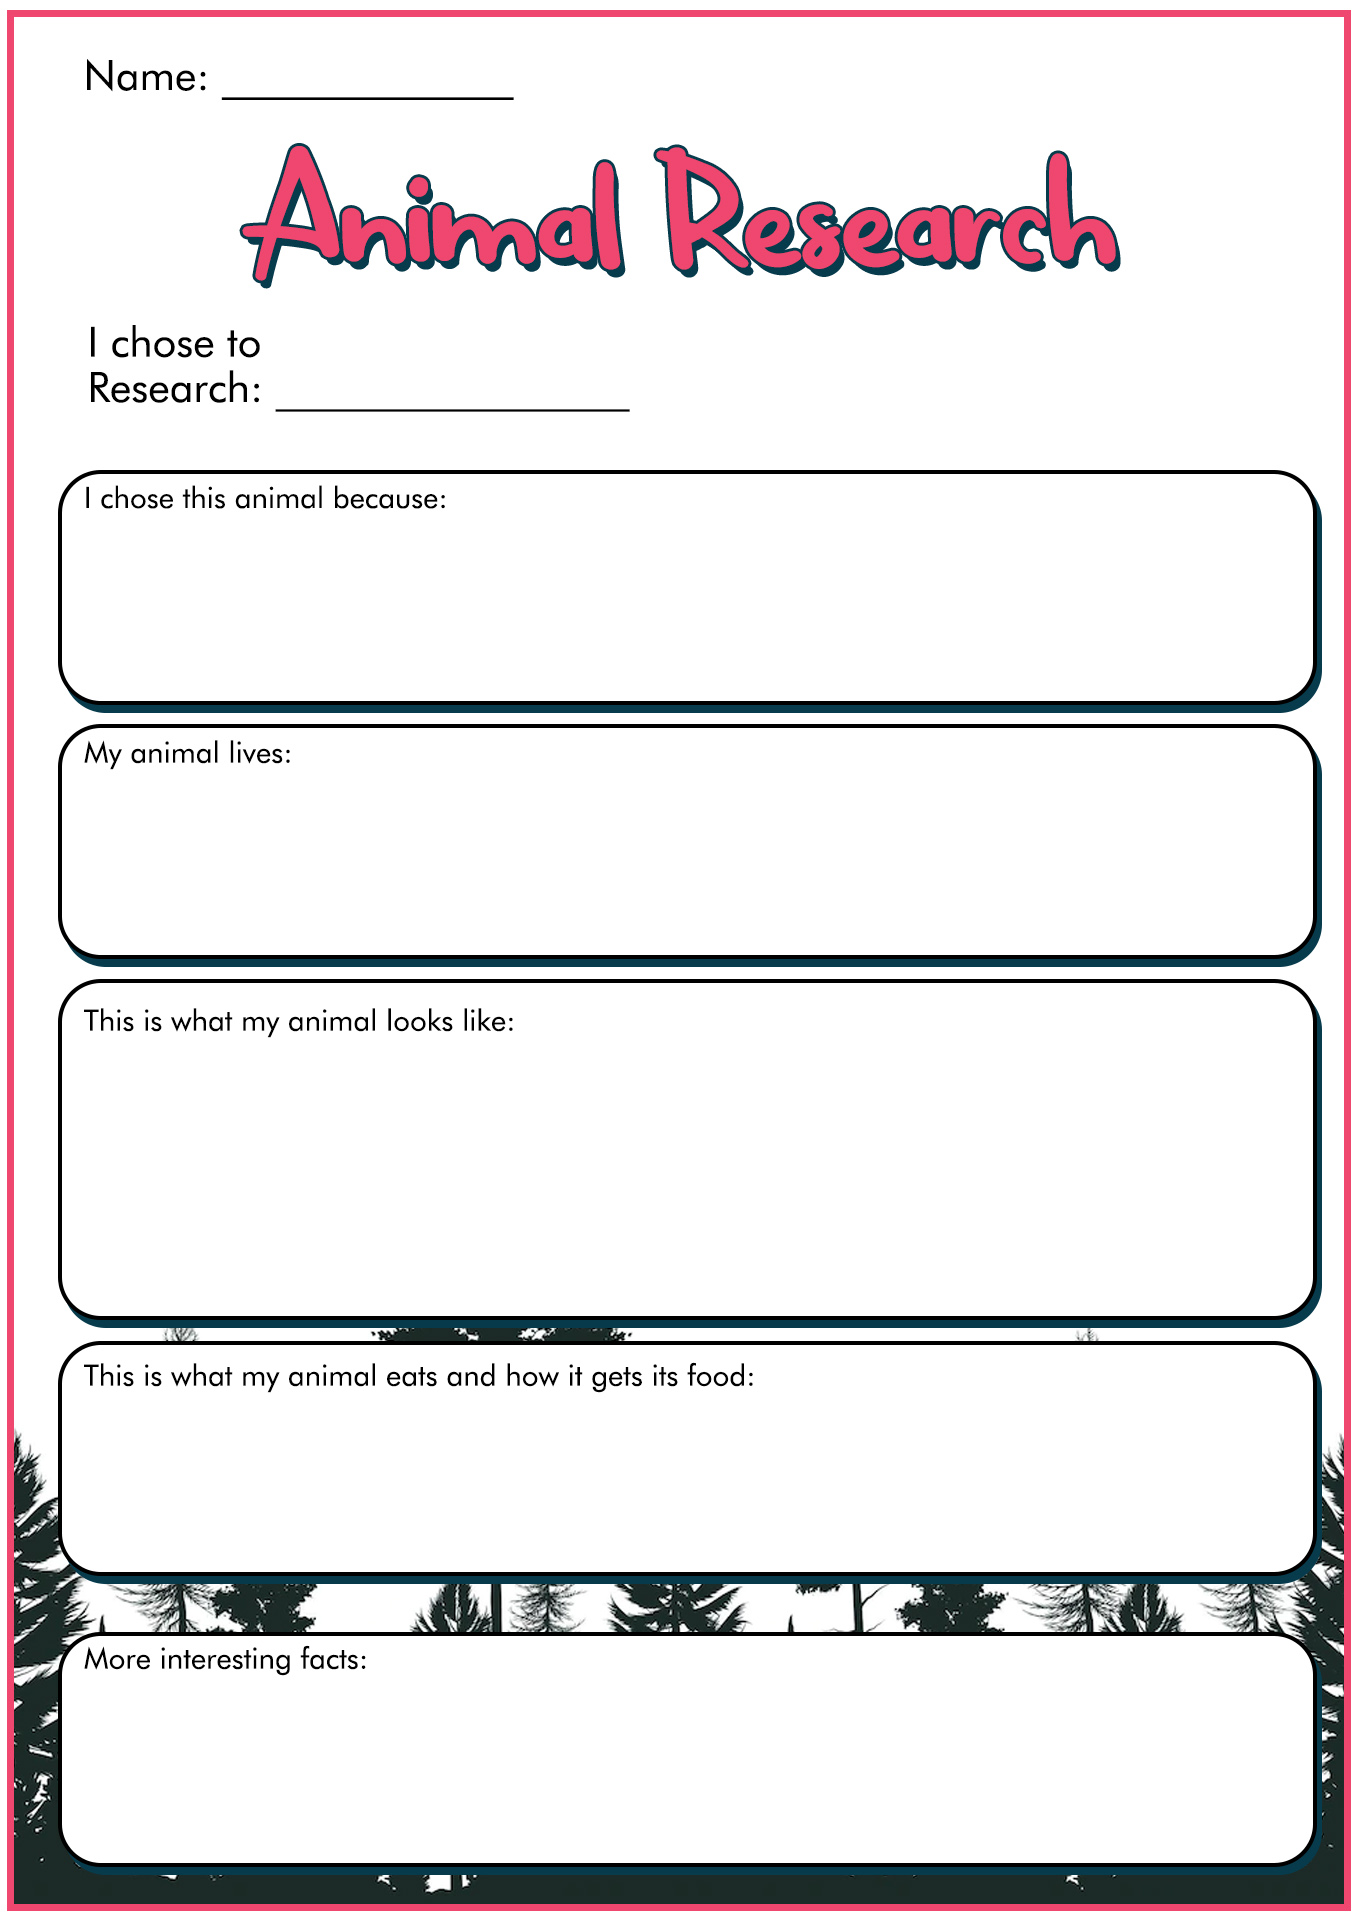 Research Report Template for Kids Image